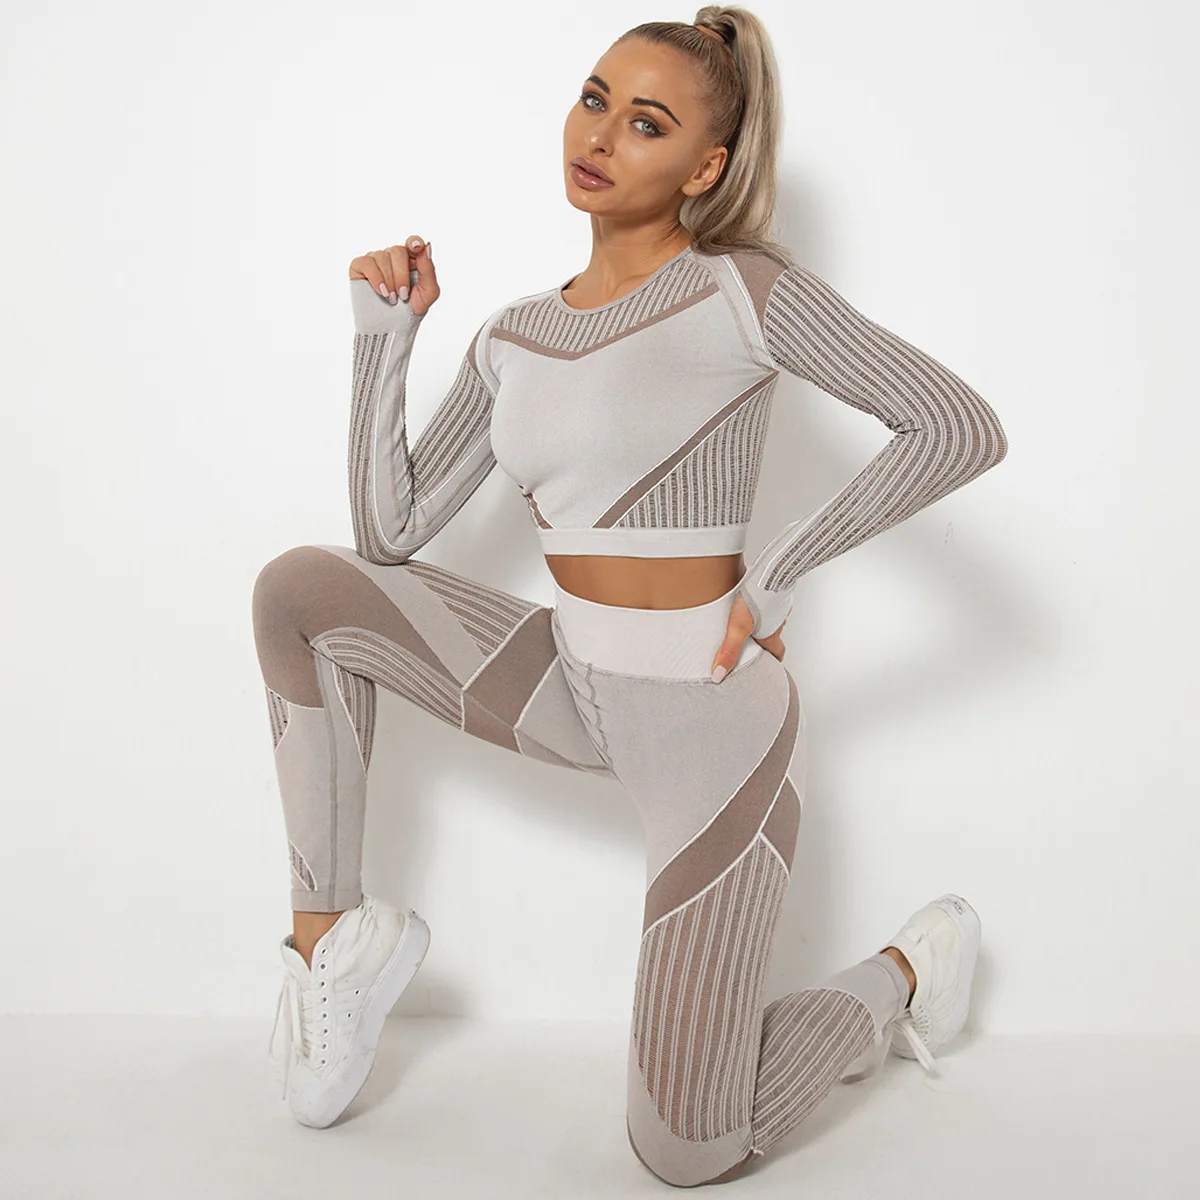 

2022 Seamless Women Sport Suit Gym Yoga Set Workout Clothes Fitness Crop Top And Scrunch Butt Leggings Yoga Set Clothing, Picture shows